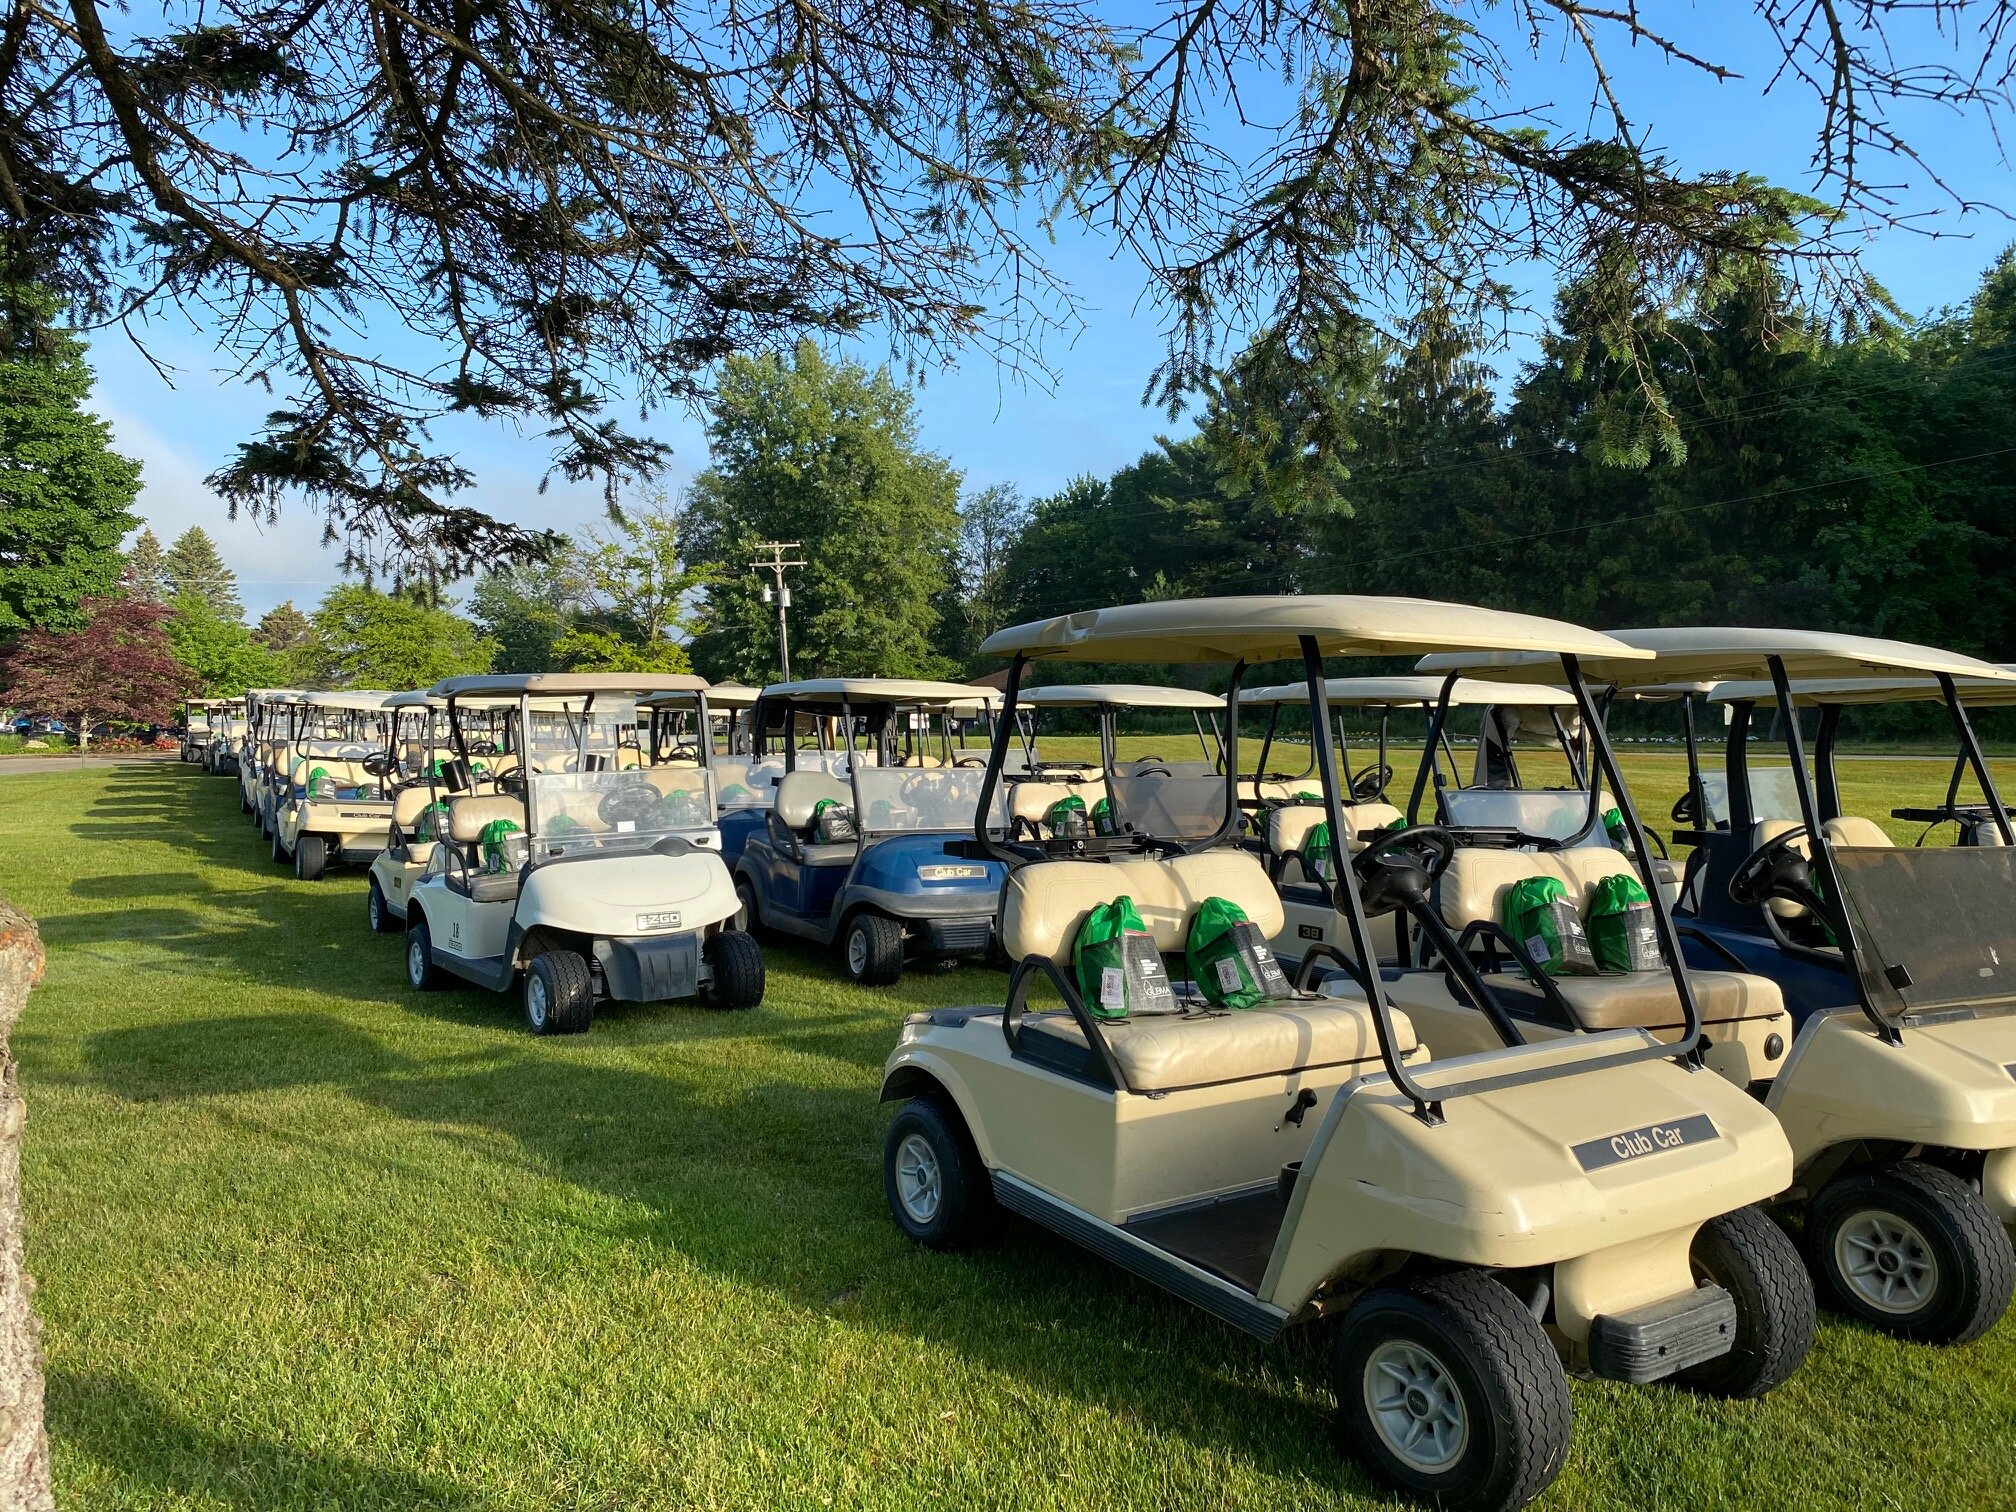 GLBMA Golf Outing 2021 - golf carts from further away.jpg